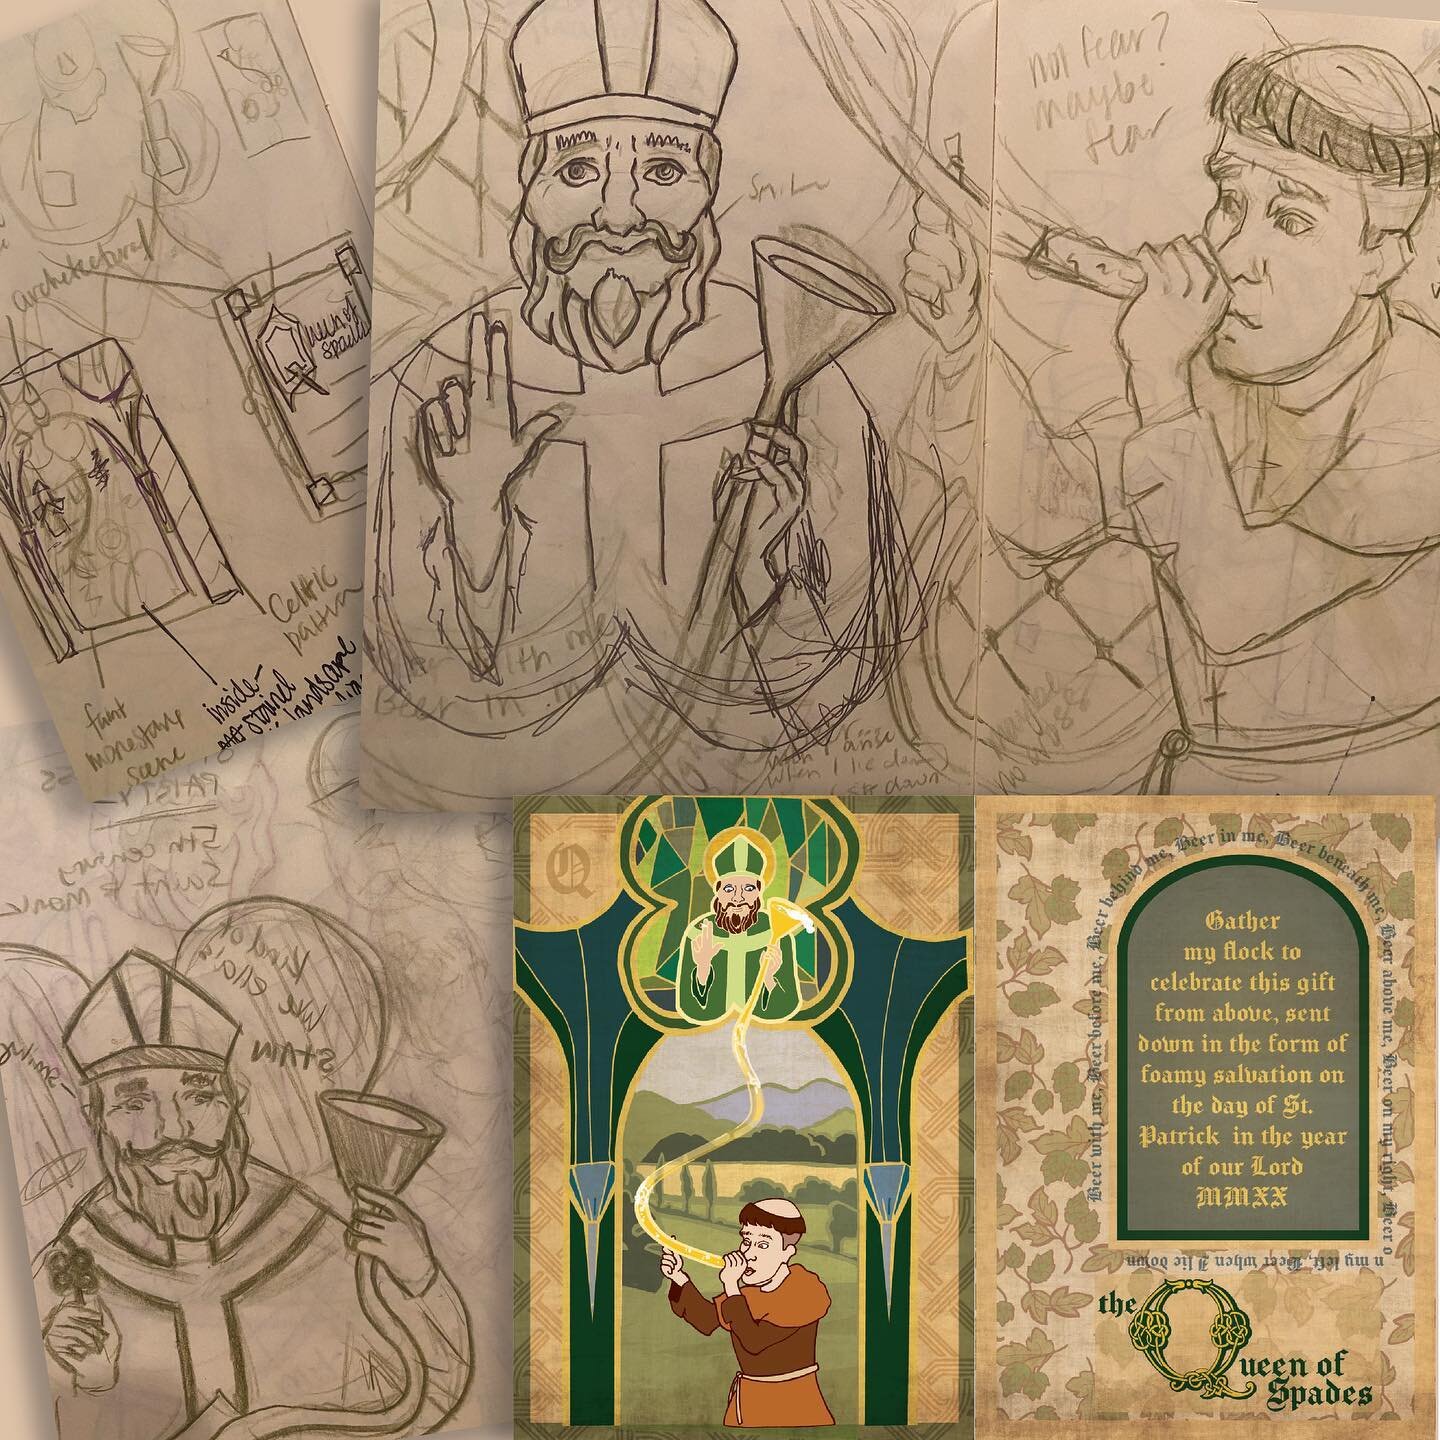 Got some stuff in the works but here&rsquo;s the story behind March 2020 Card Night 🍀History&rsquo;s St.  Patrick but make him River Street ready. Here St. Patrick is helping a 5th century monk funnel beer - but what really was the most fun (usually